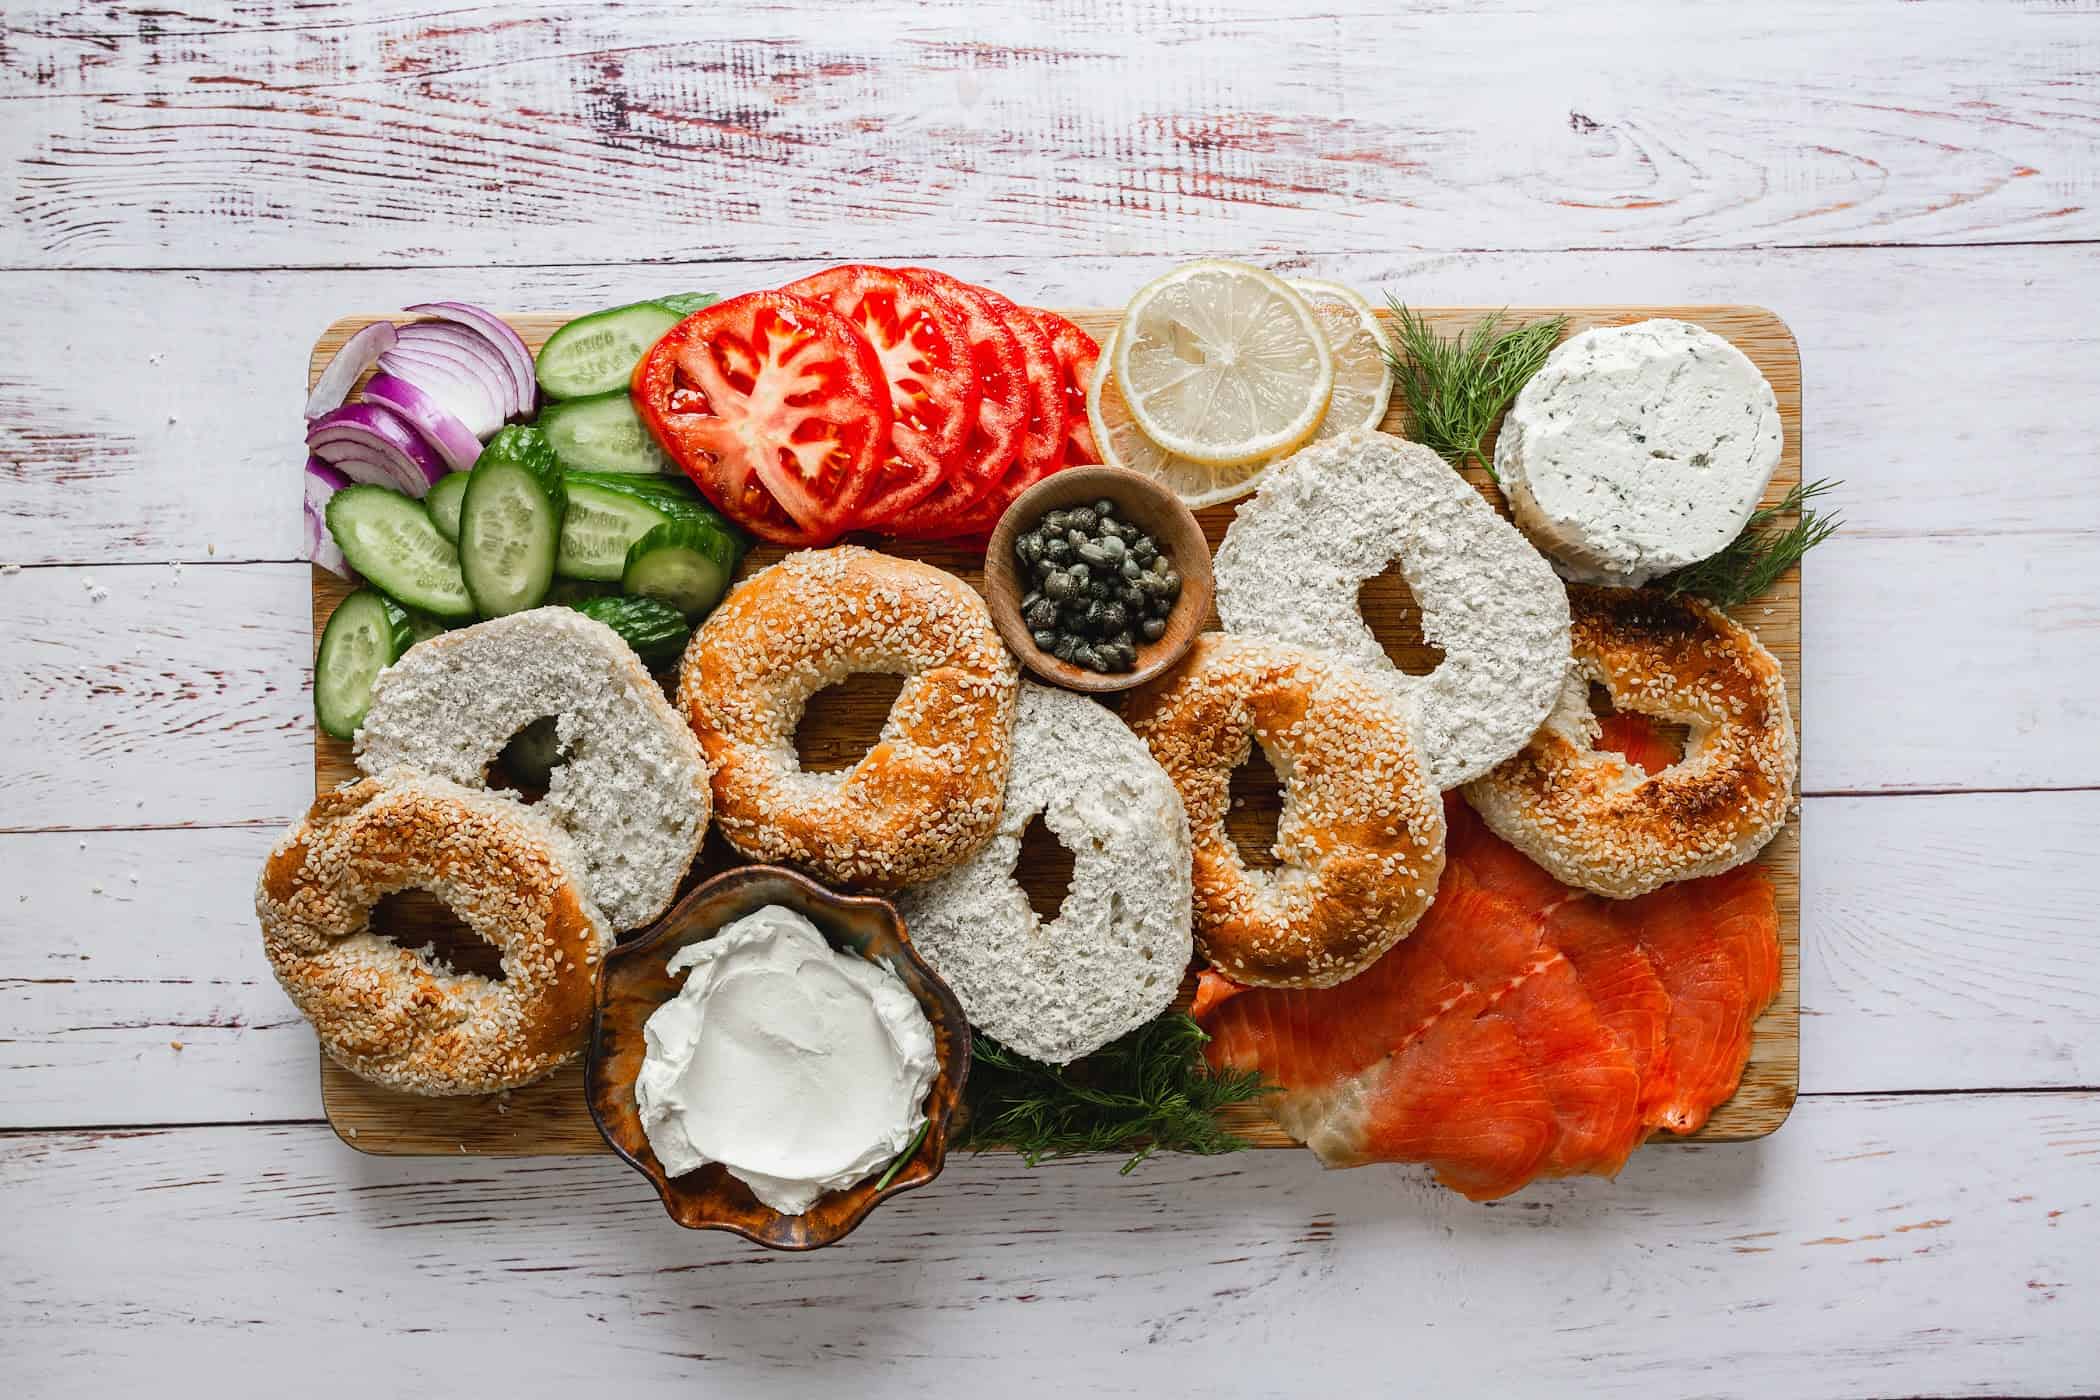 Lox and bagel board on a table.